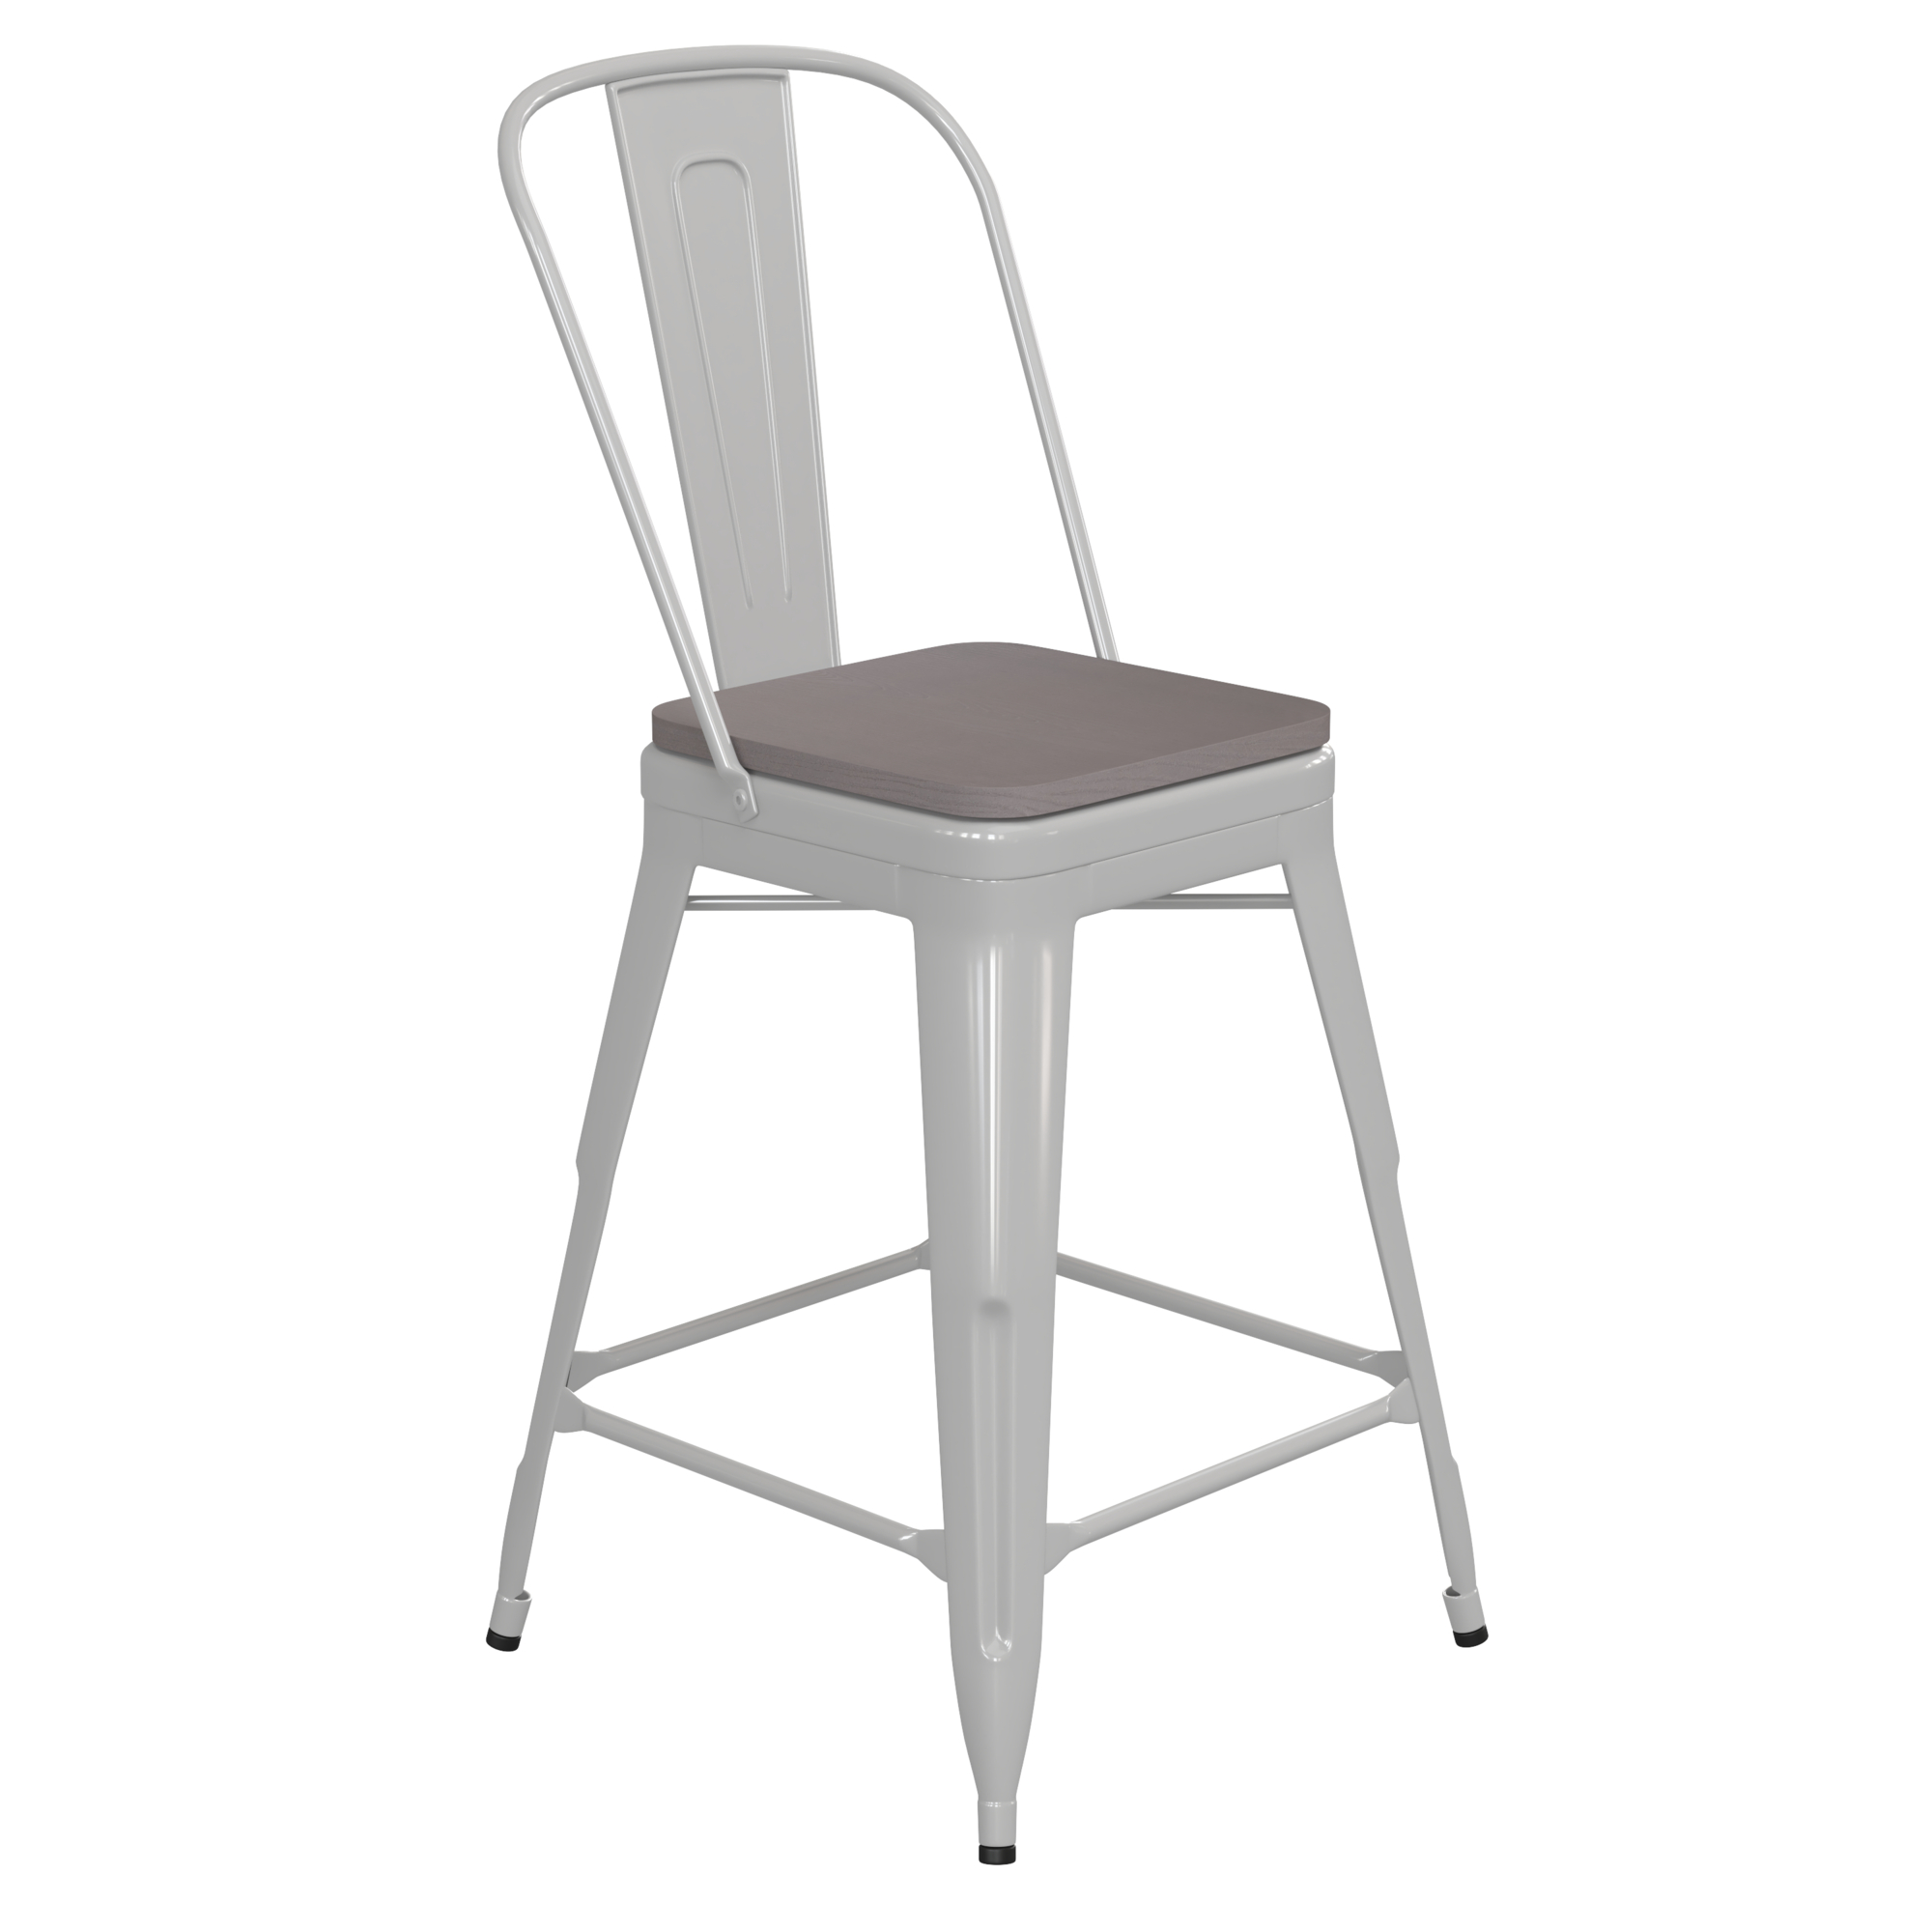 Flash Furniture, 24Inch White Metal Counter Stool-Gray Poly Seat, Primary Color White, Included (qty.) 1, Model CH3132024GBWP2G